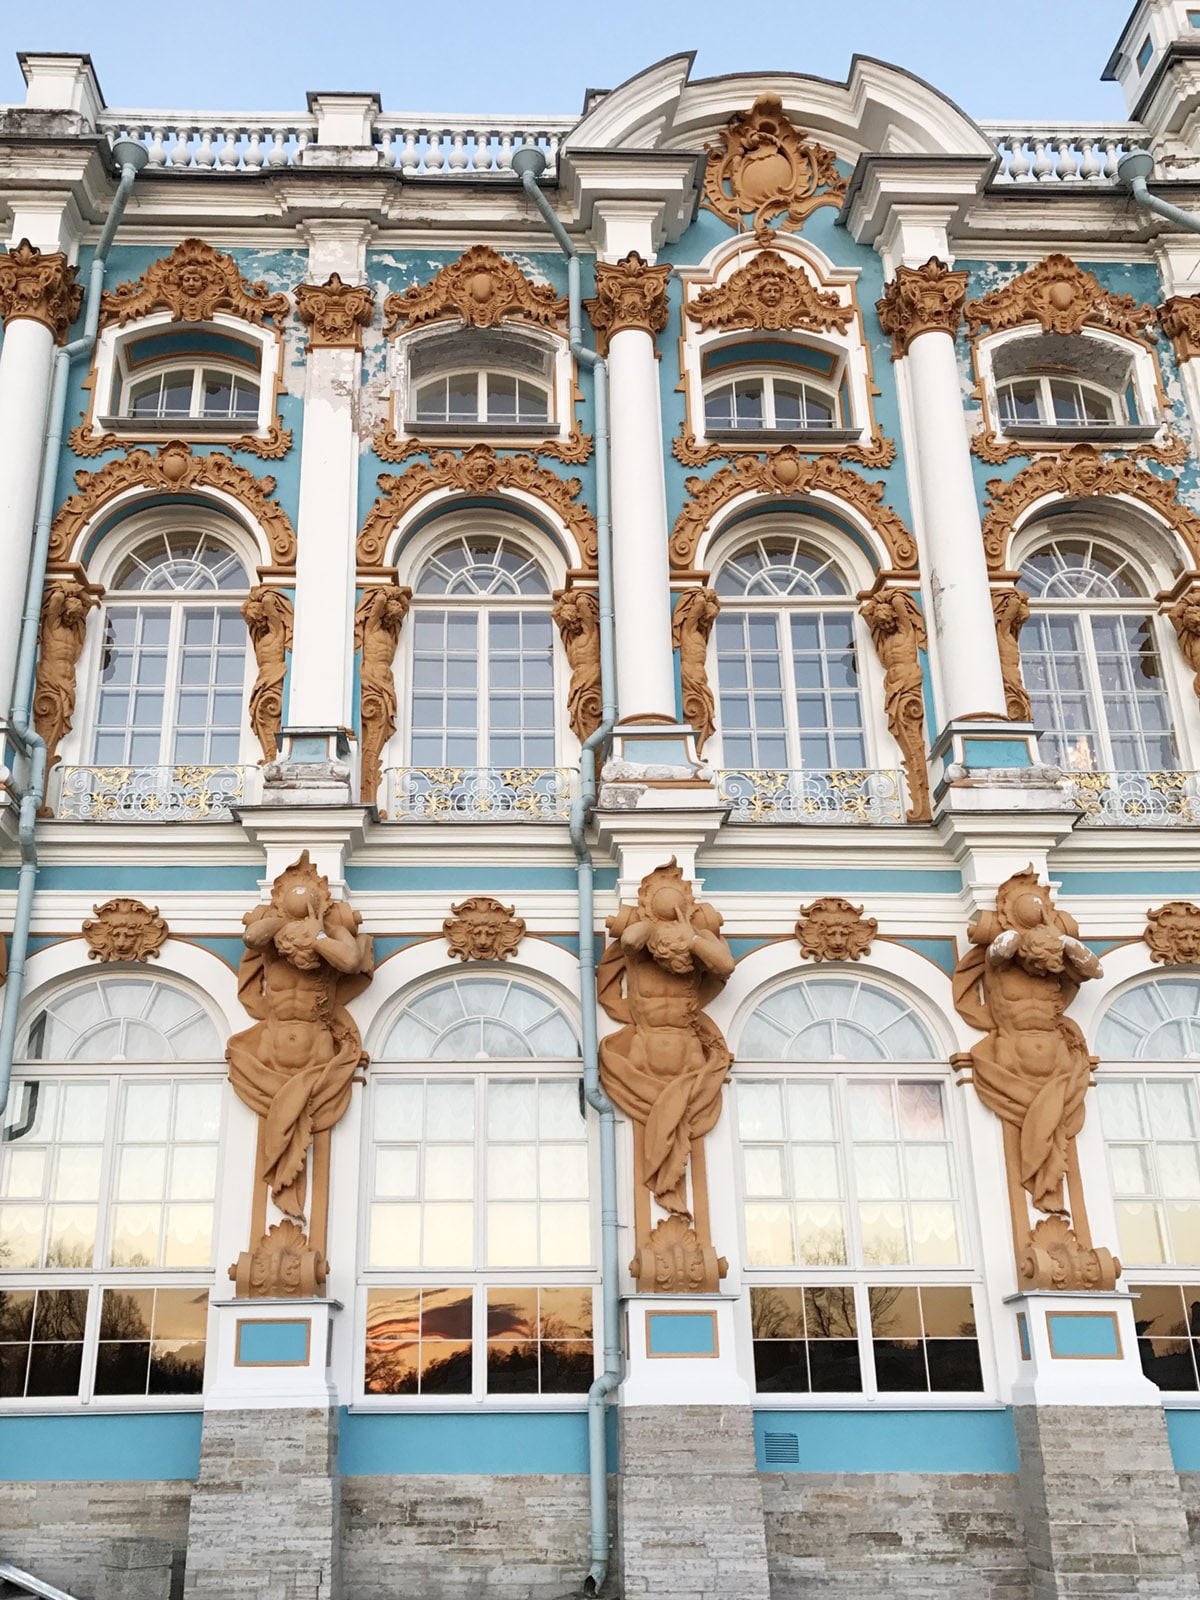 the exterior of Catherine's Palace in St. Petersburg | russia travel guide on coco kelley